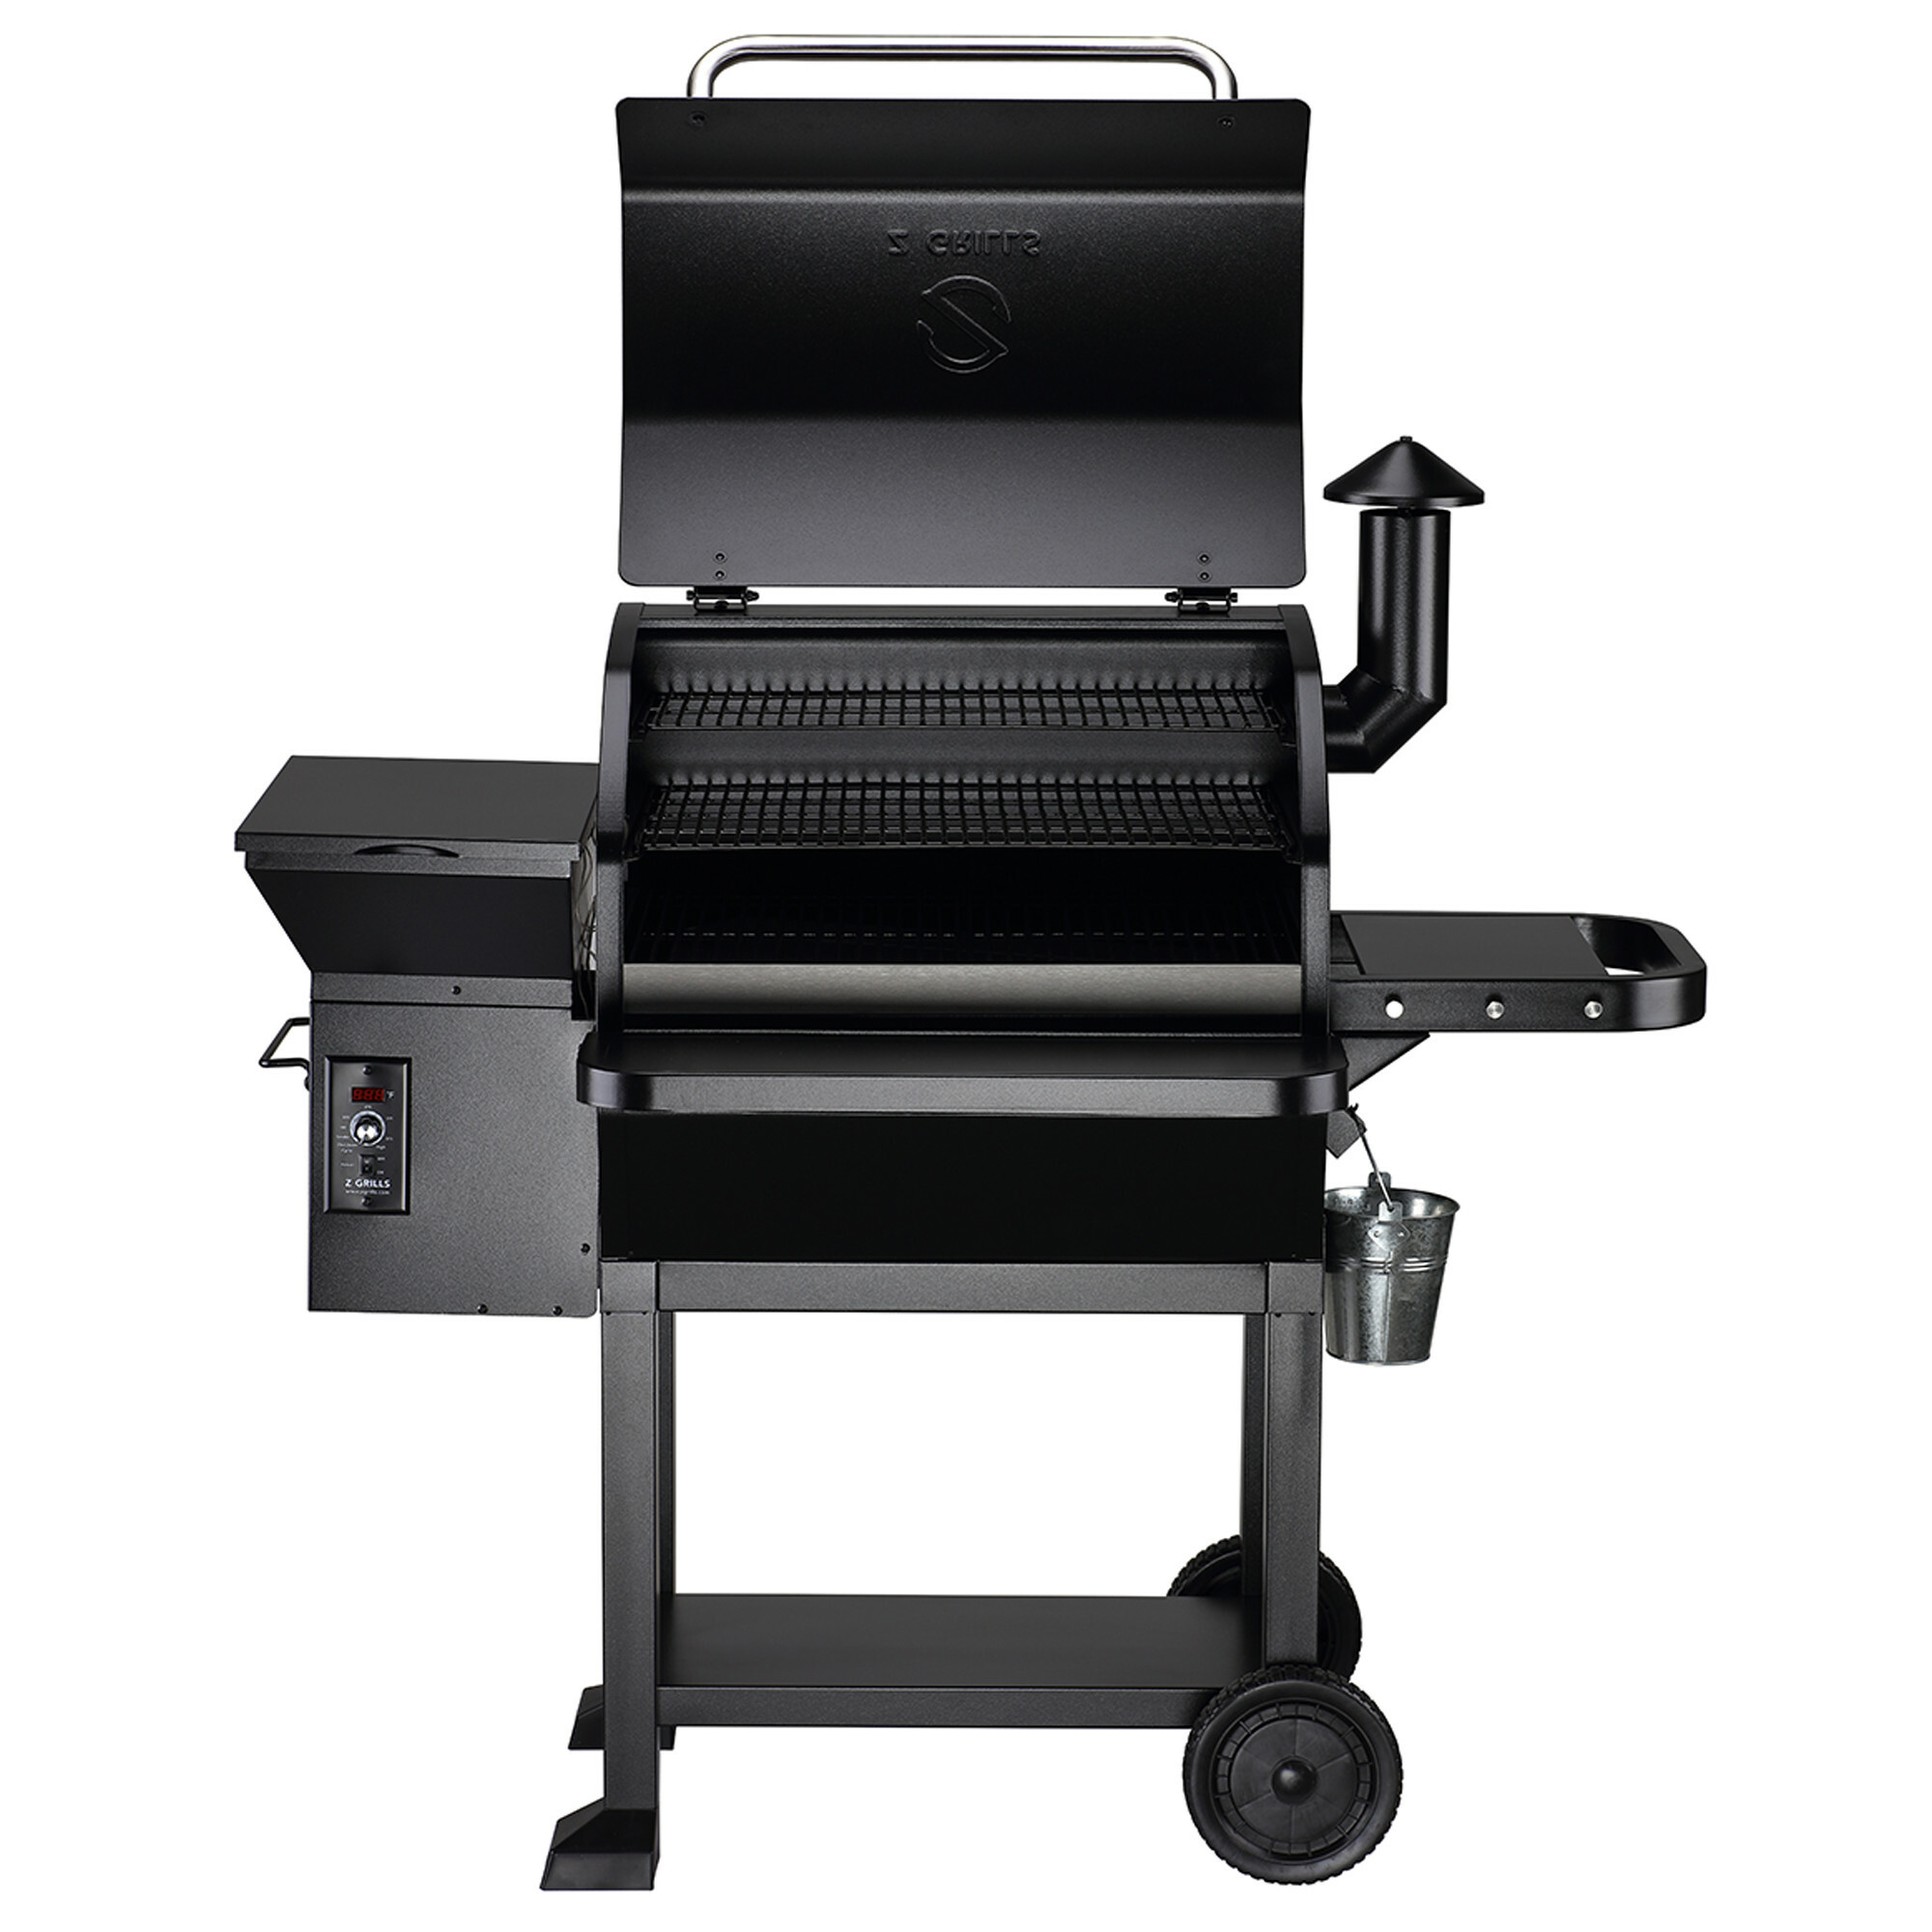 Z GRILLS ZPG-10002B 1060 sq. in. Wood Pellet Grill and Smoker 8-in-1 BBQ Black - image 3 of 12